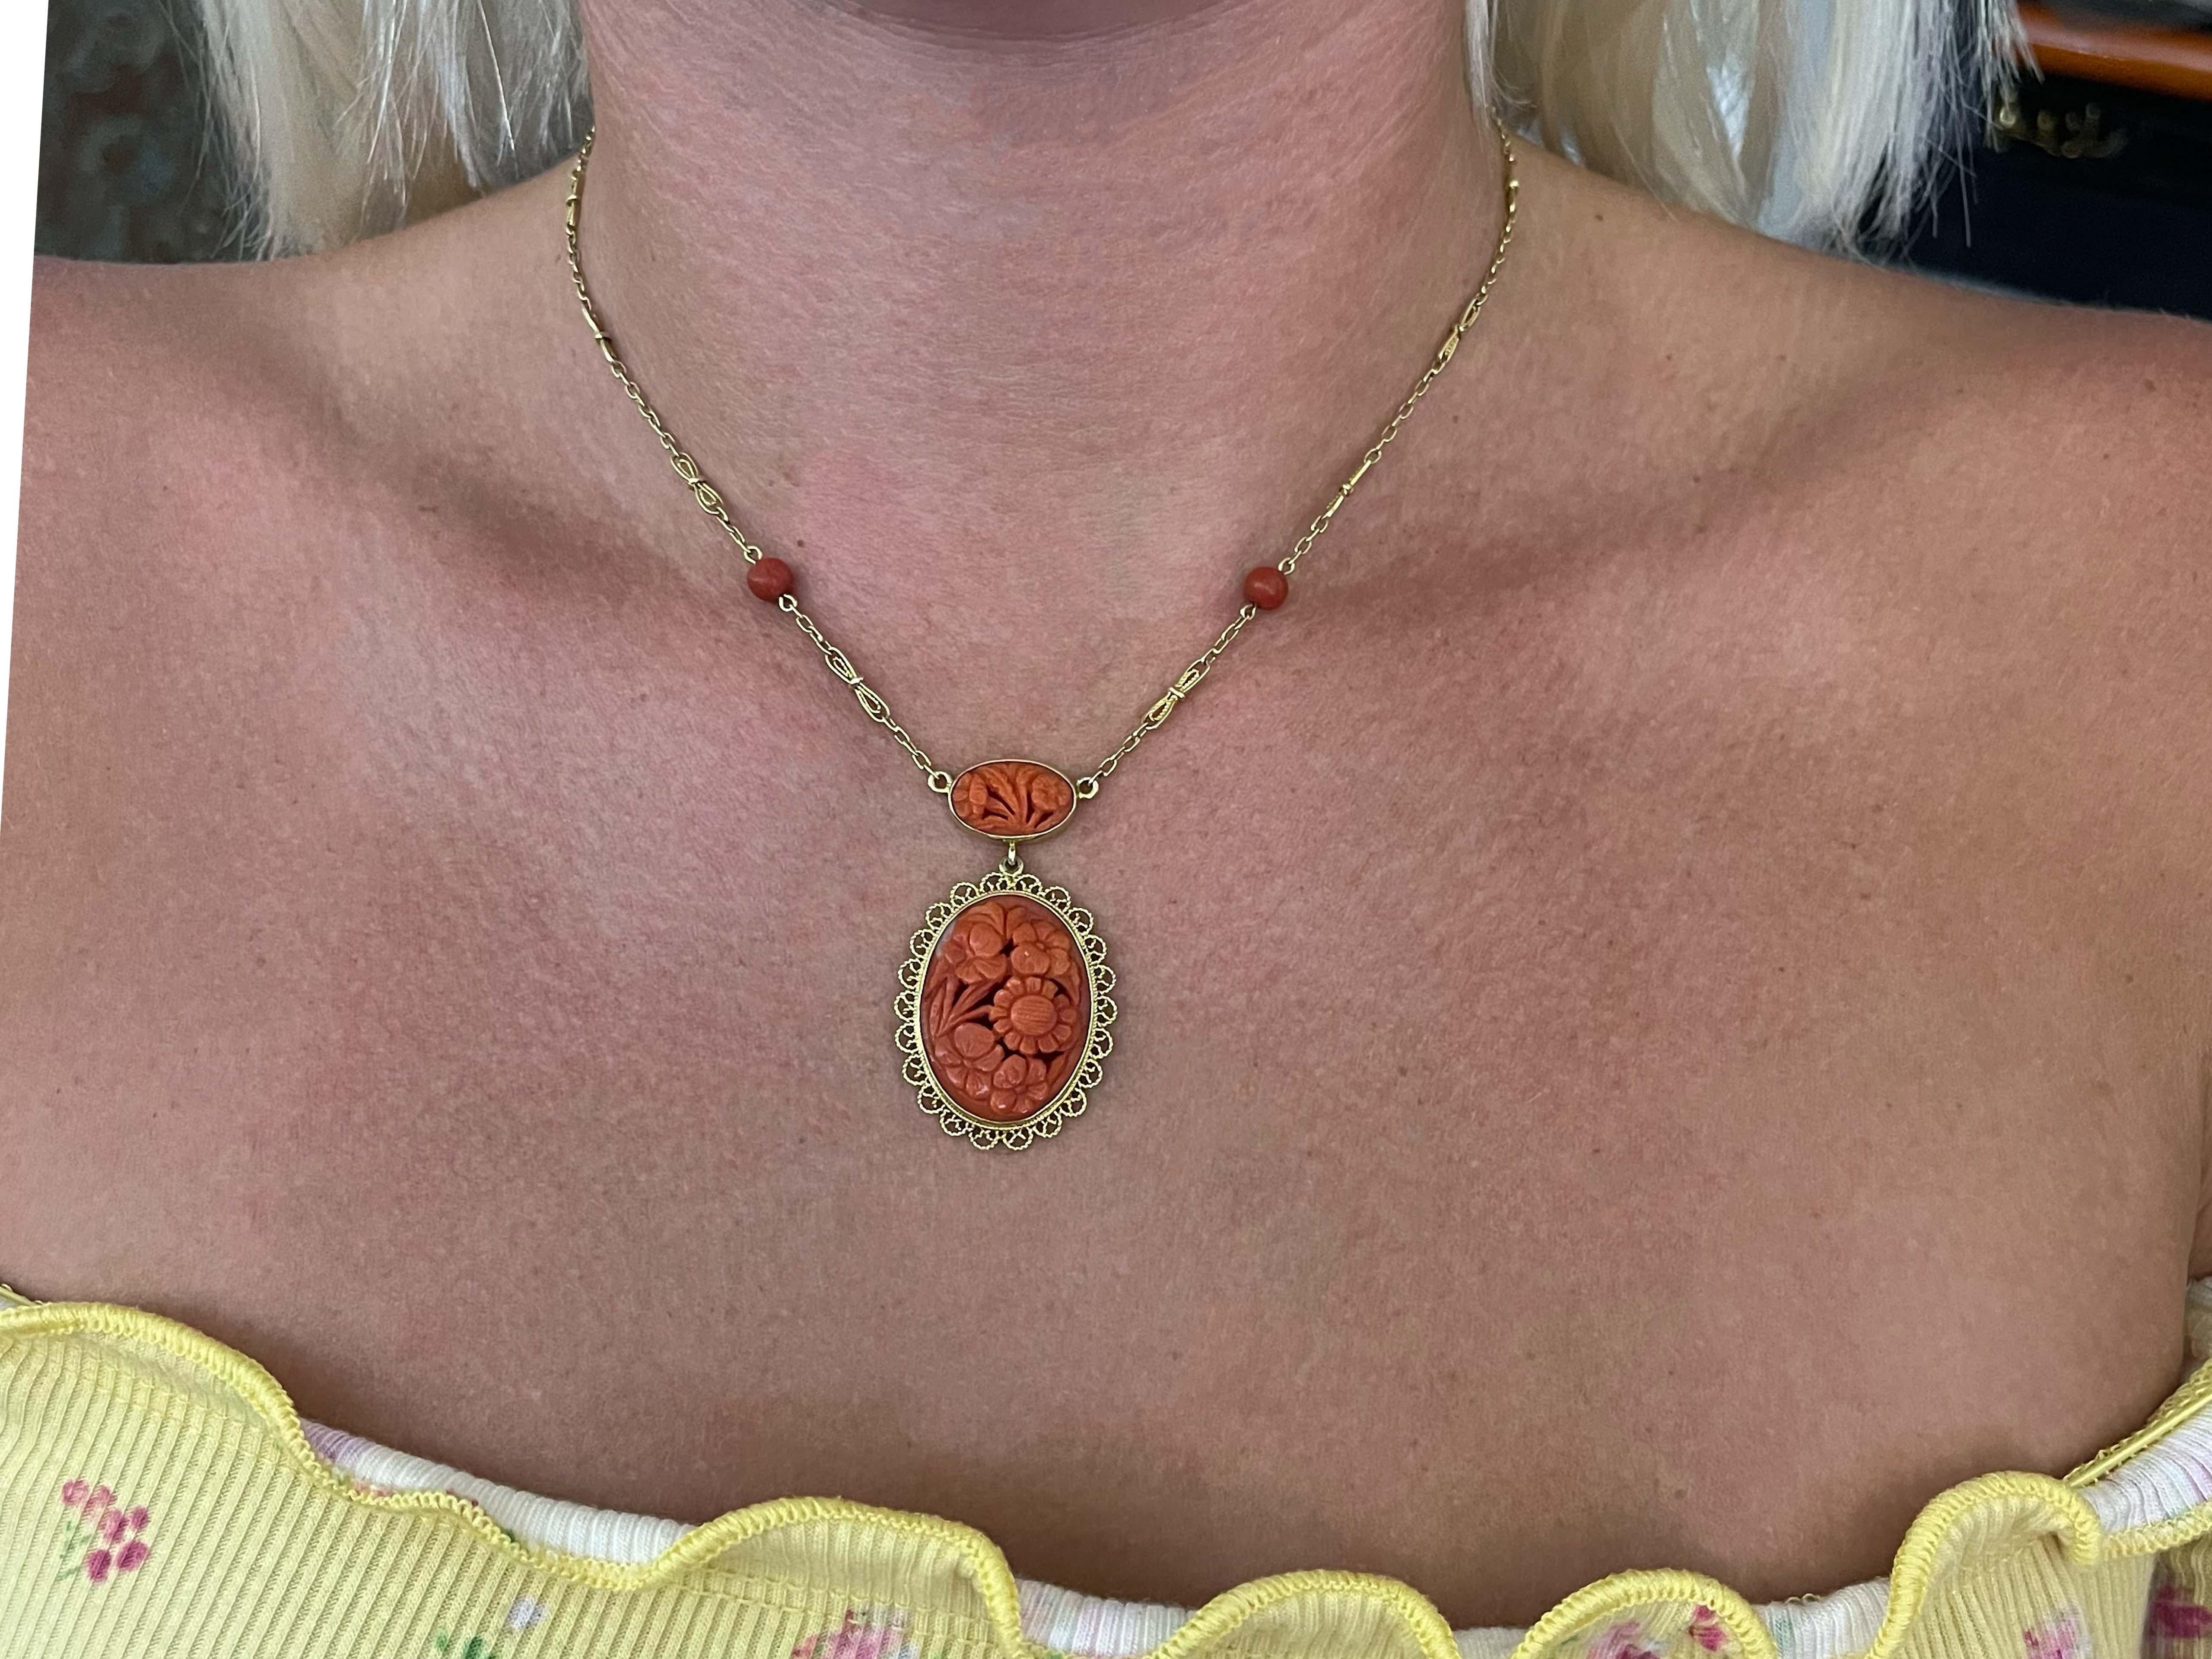 This gorgeous carved natural mediterranean red coral necklace is circa 1970's. The pierced carved red coral features flowers. The pendant is approximately 1.75